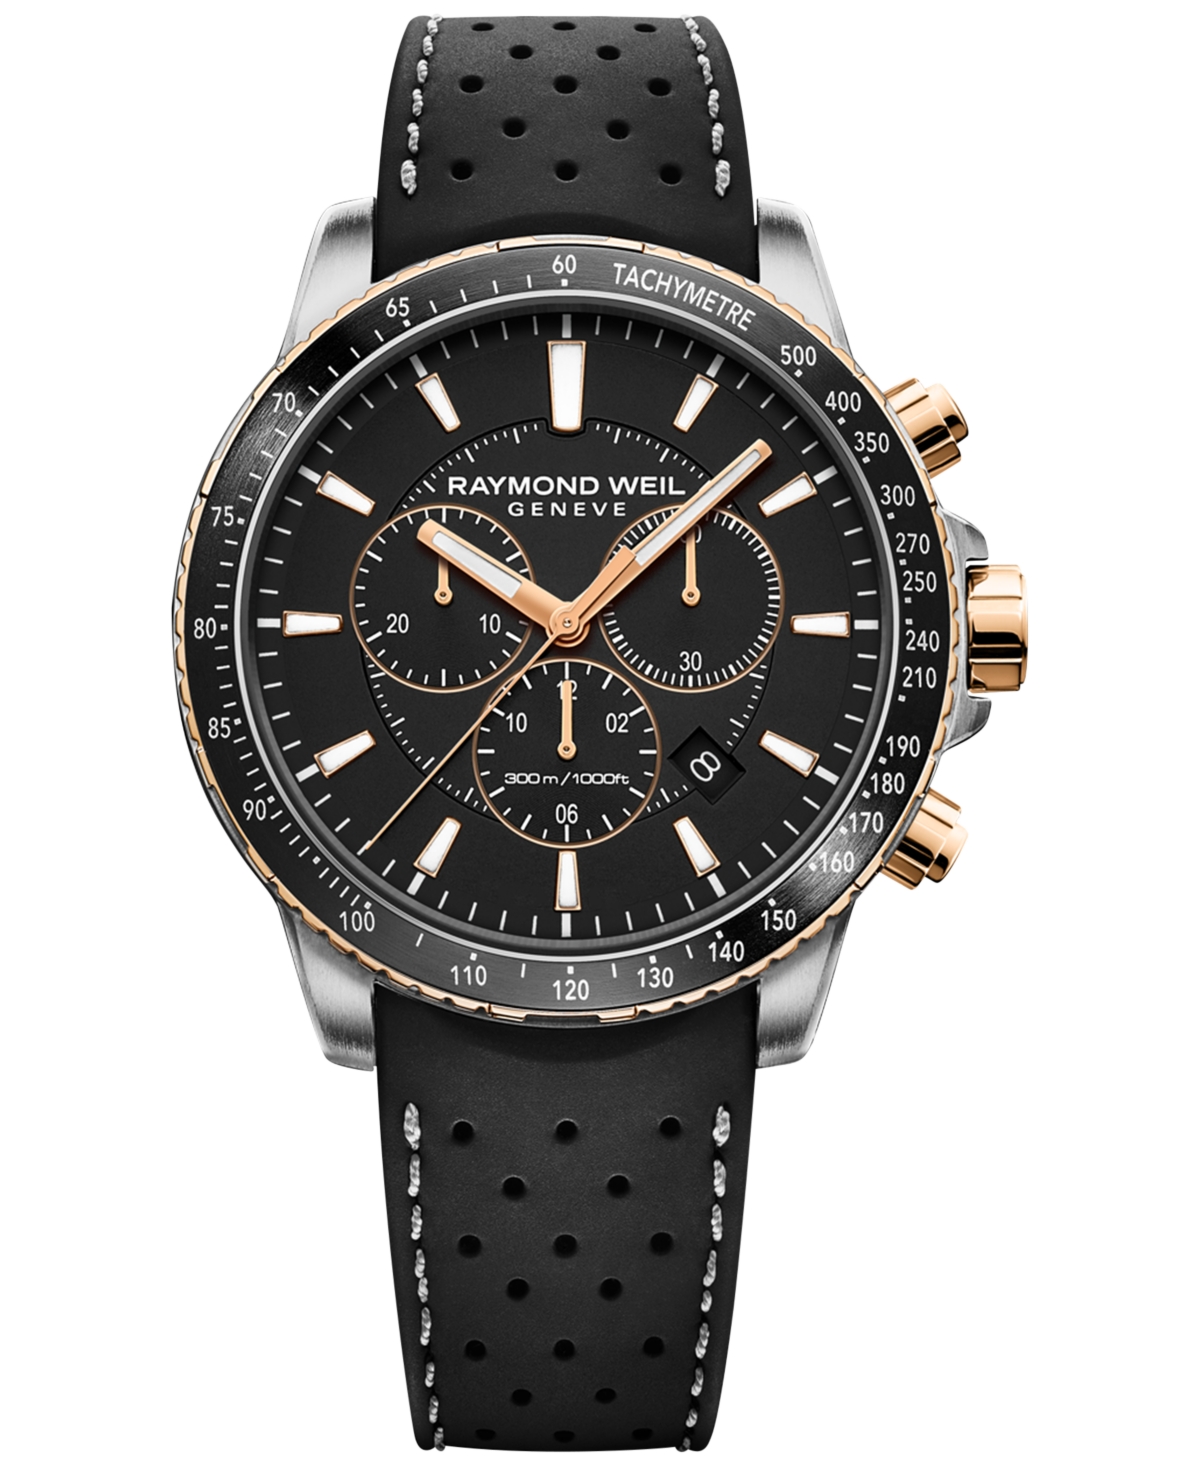 Raymond Weil Men's Swiss Chronograph Tango Black Perforated Rubber Strap Watch 43mm